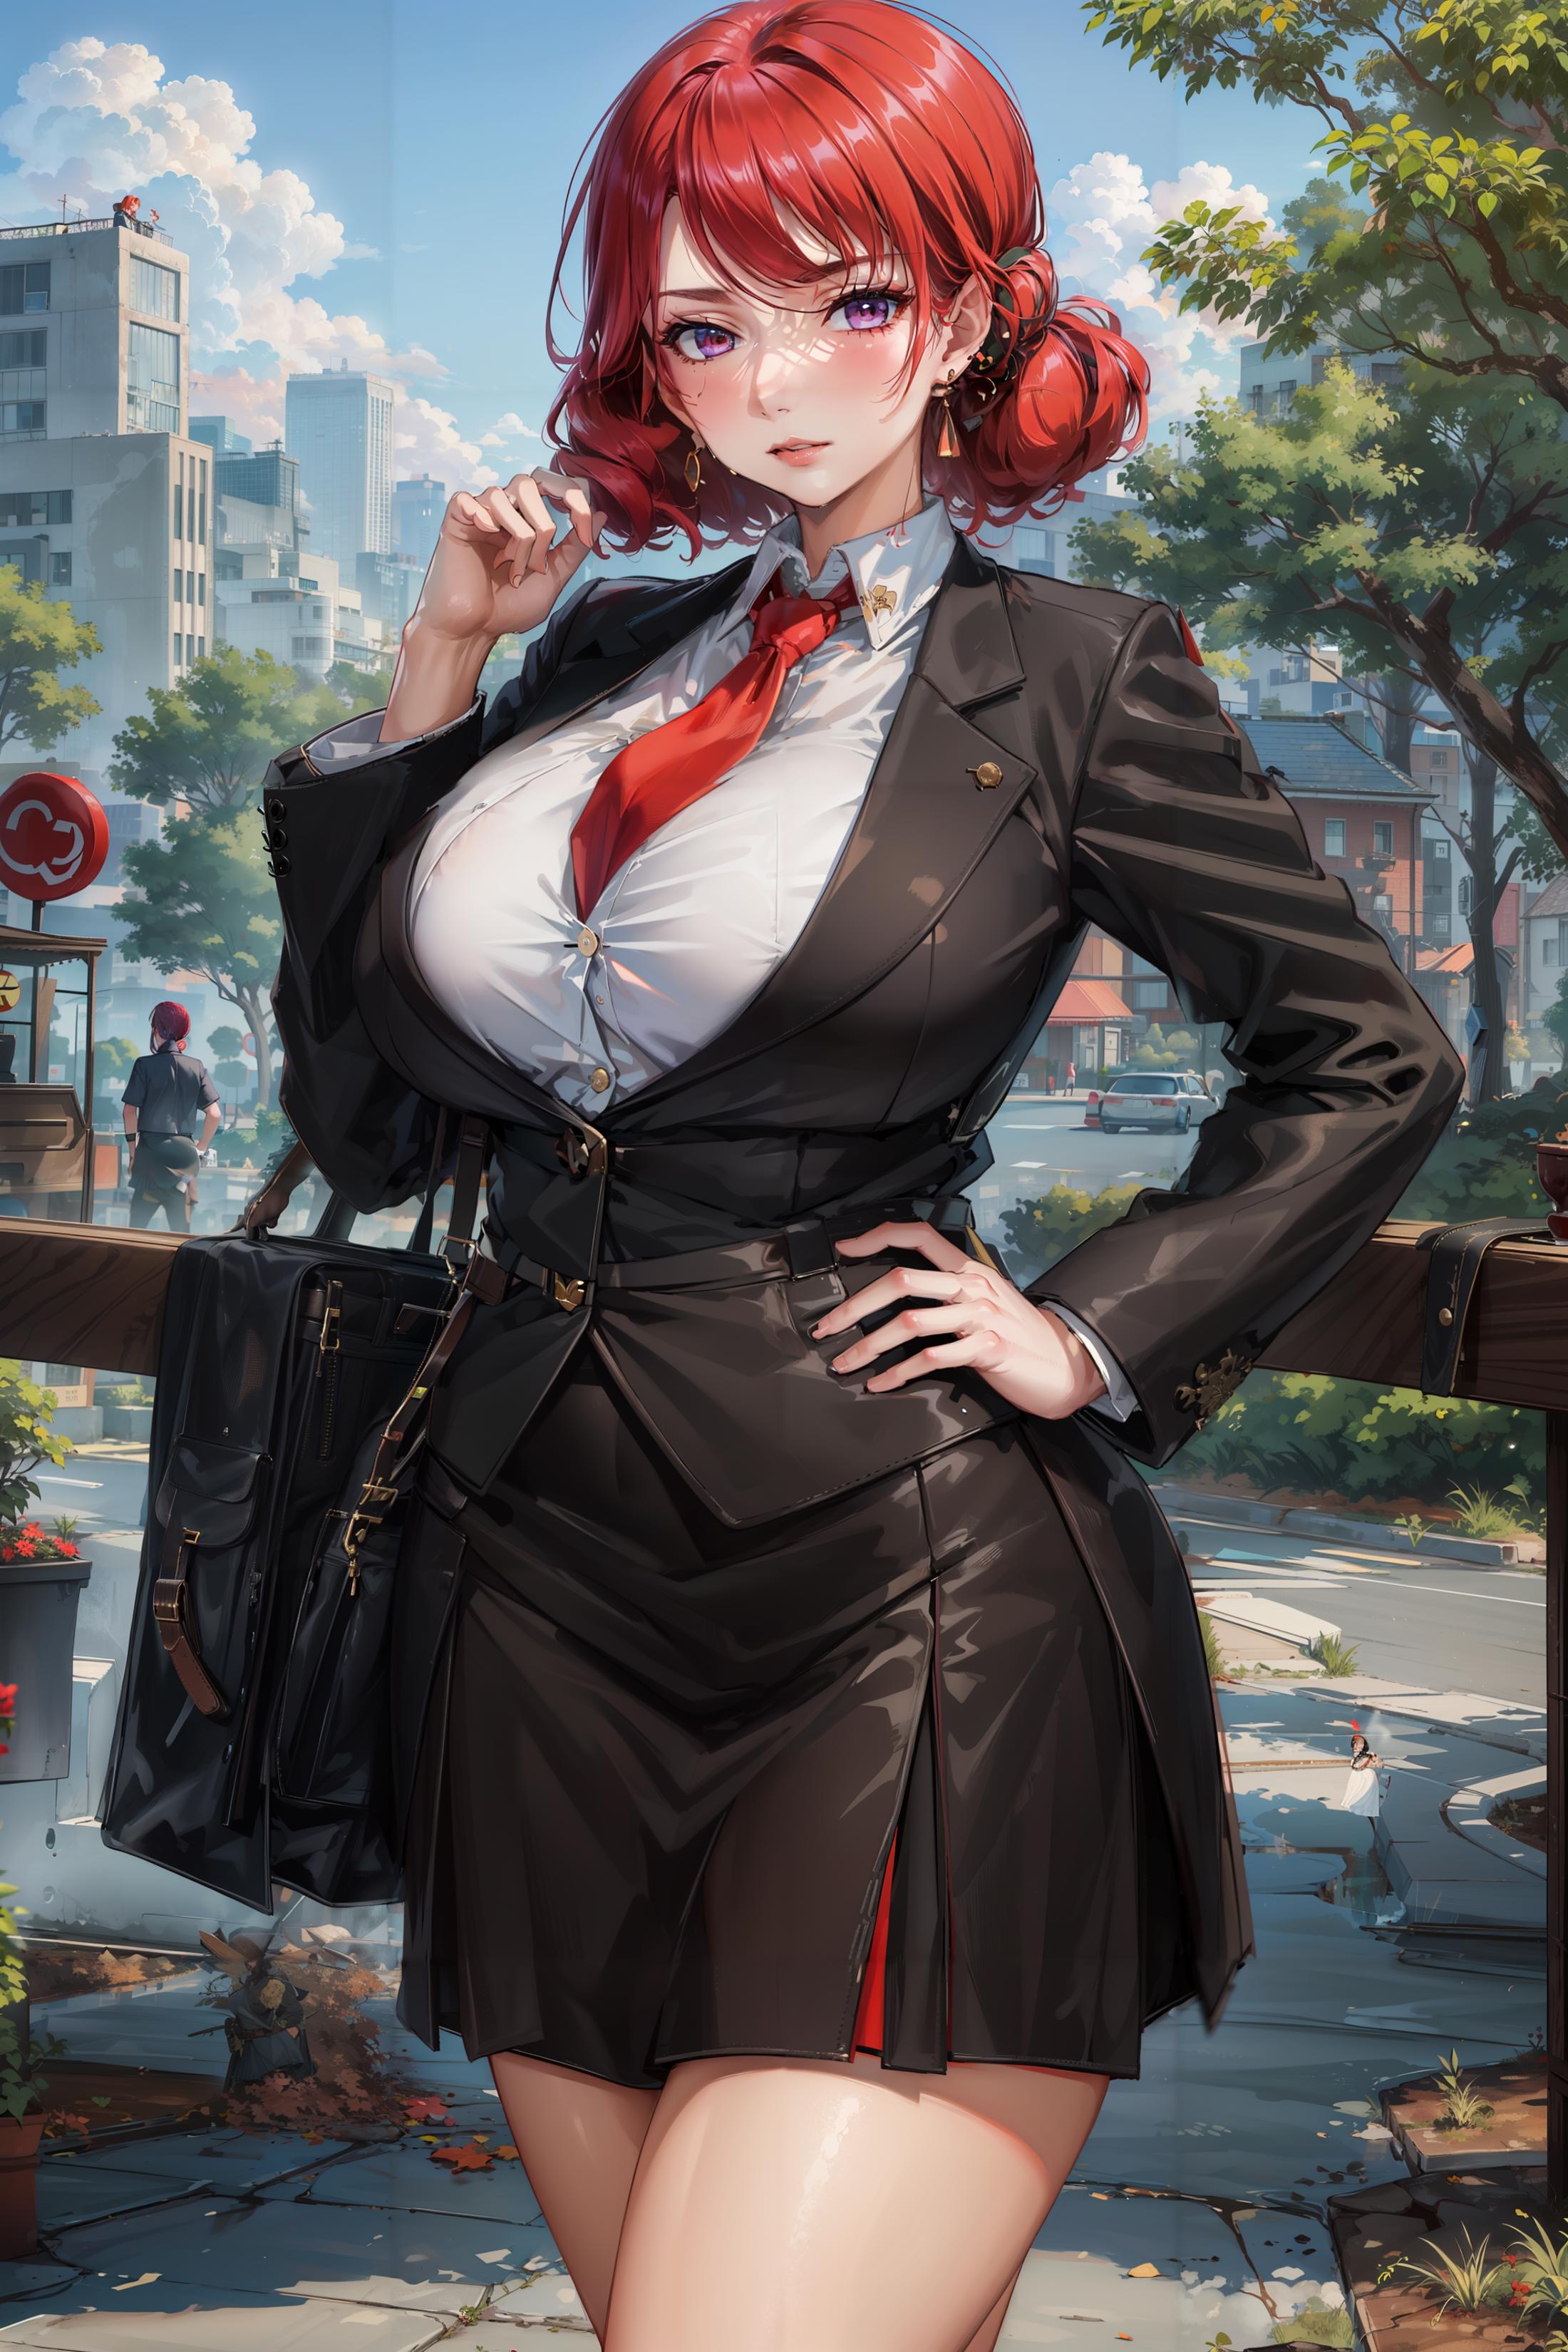 Hongryeon (Last Origin) 3 + 1 outfits image by maxdev192